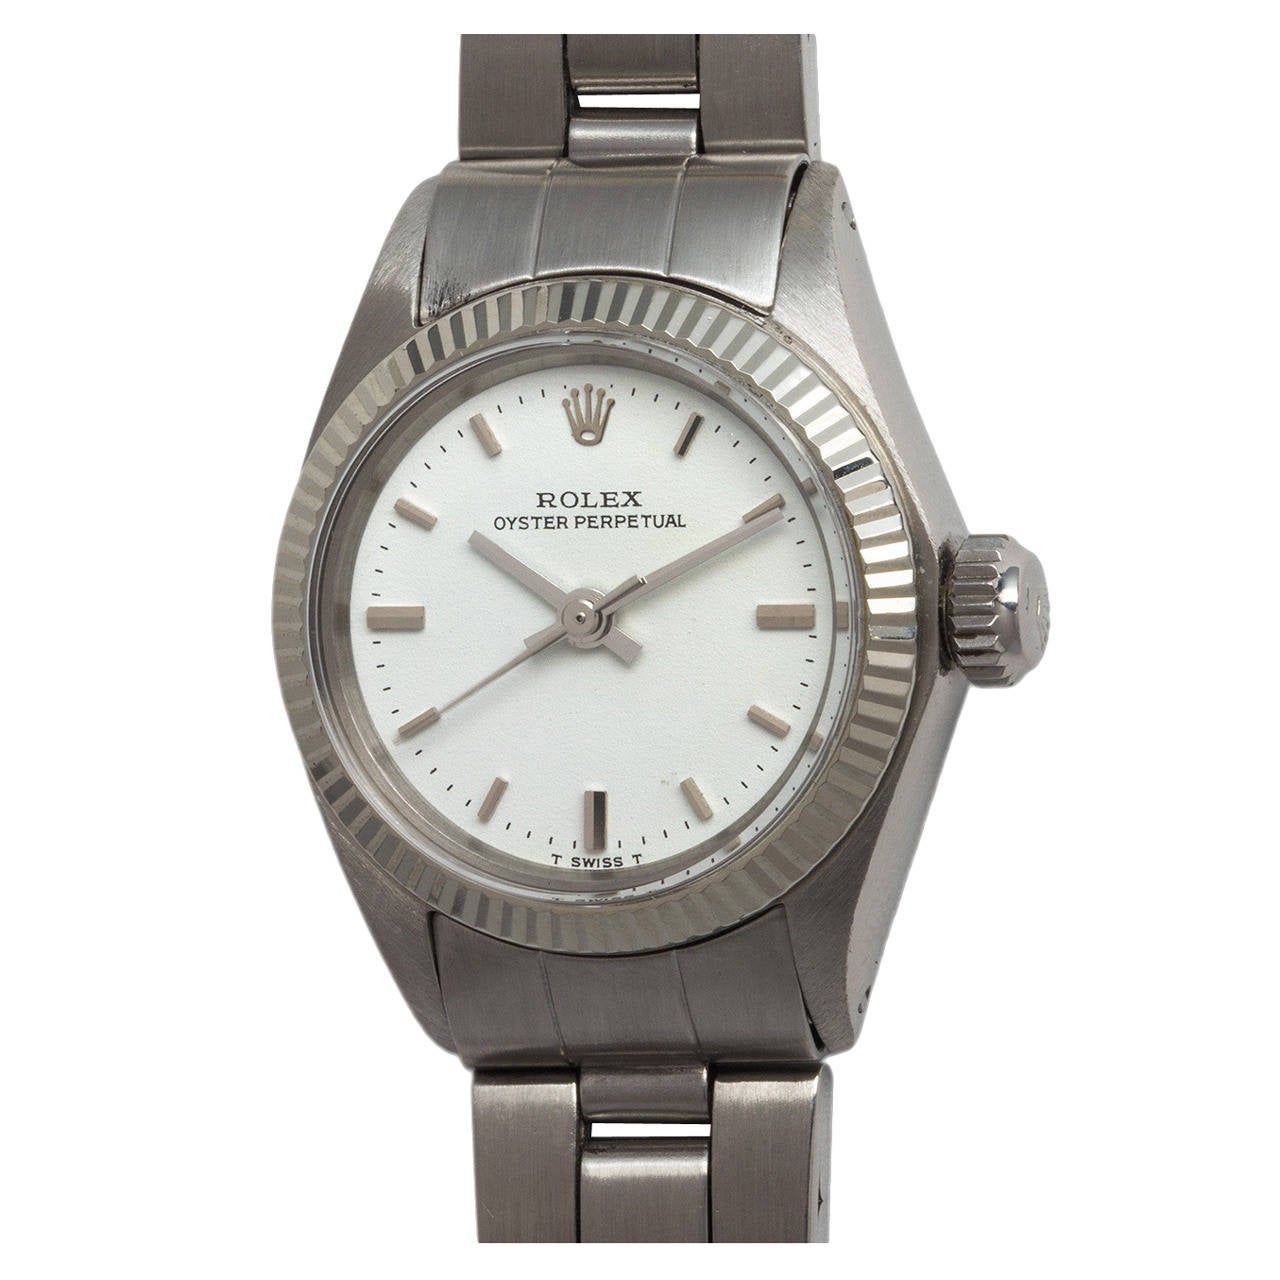 Rolex Lady's Stainless Steel Oyster Perpetual Wristwatch Ref 6719 circa 1972